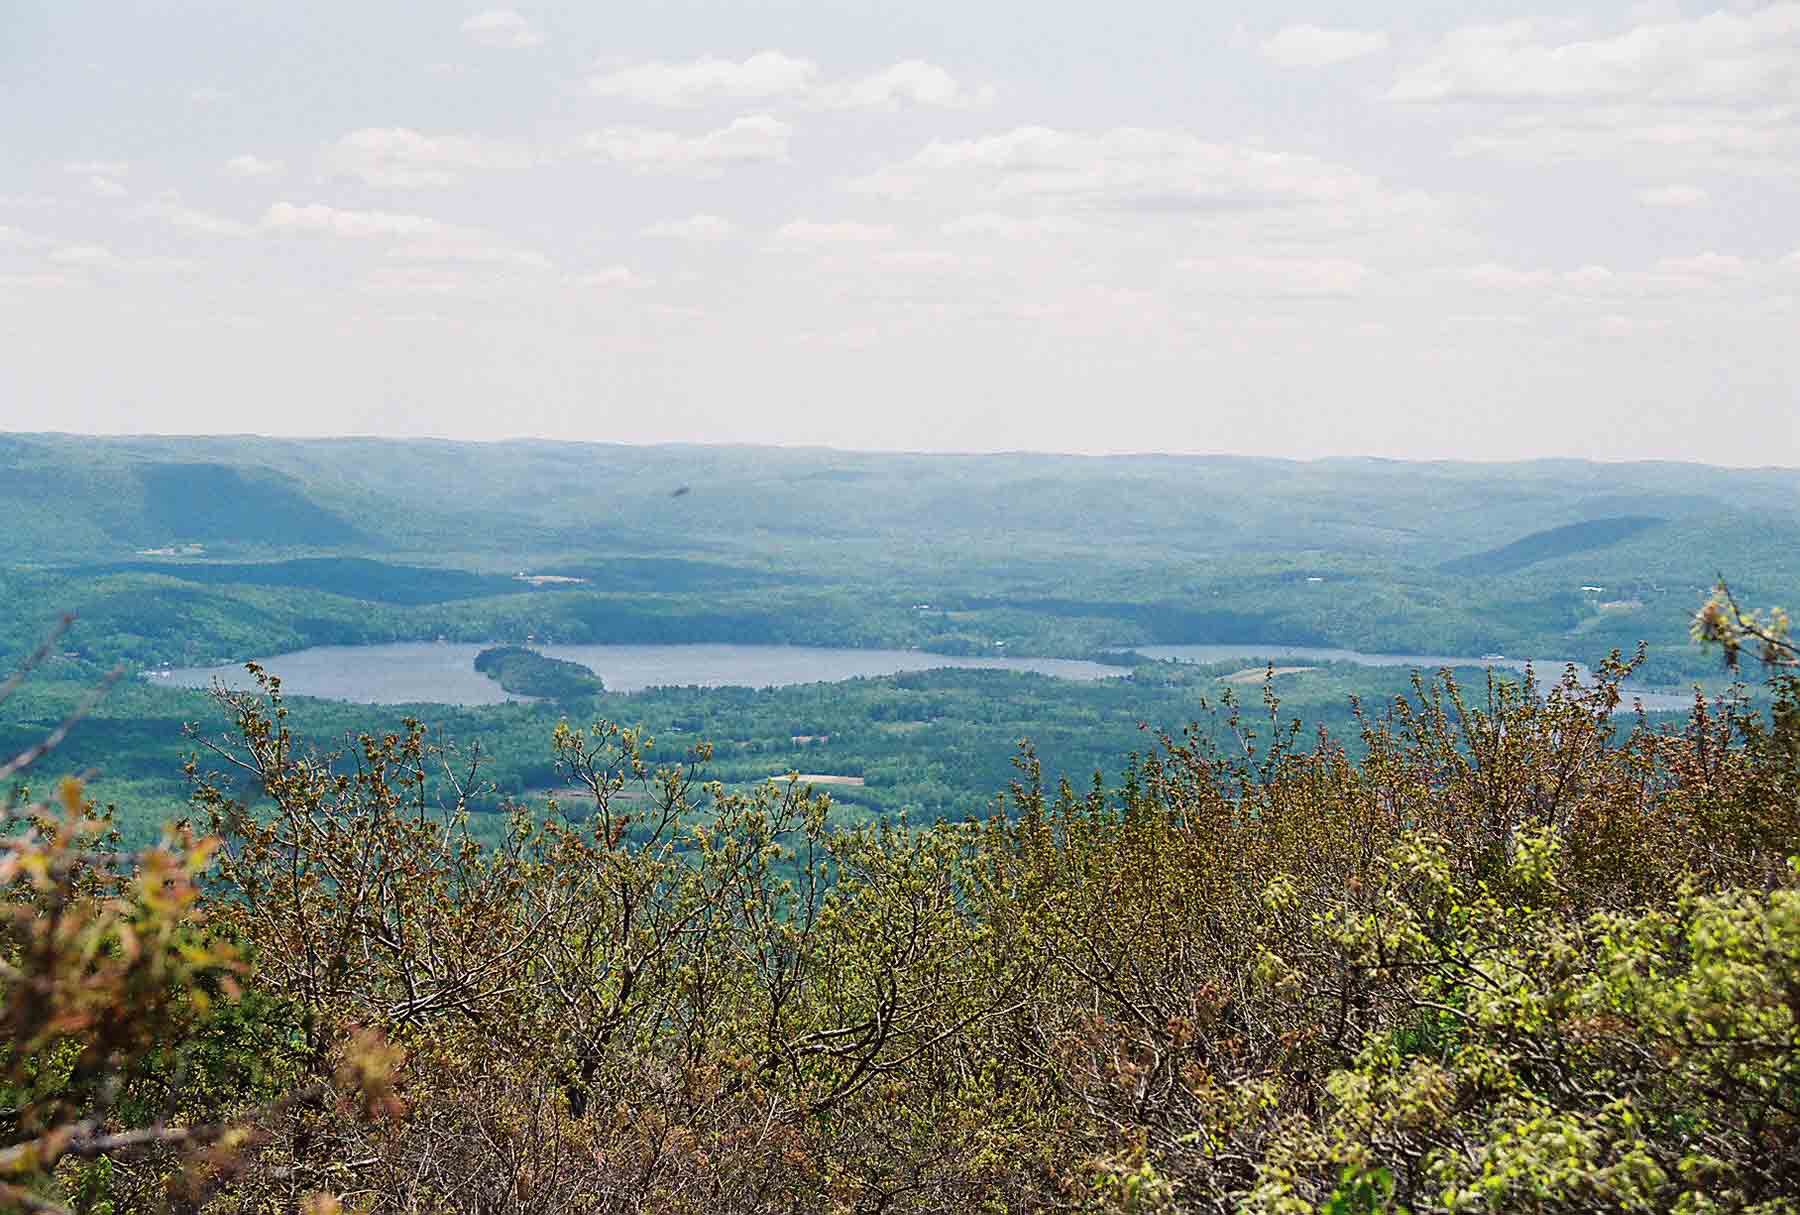 mm 6.4 - View to the east from the summit of Race Mt.  Courtesy dlcul@conncoll.edu